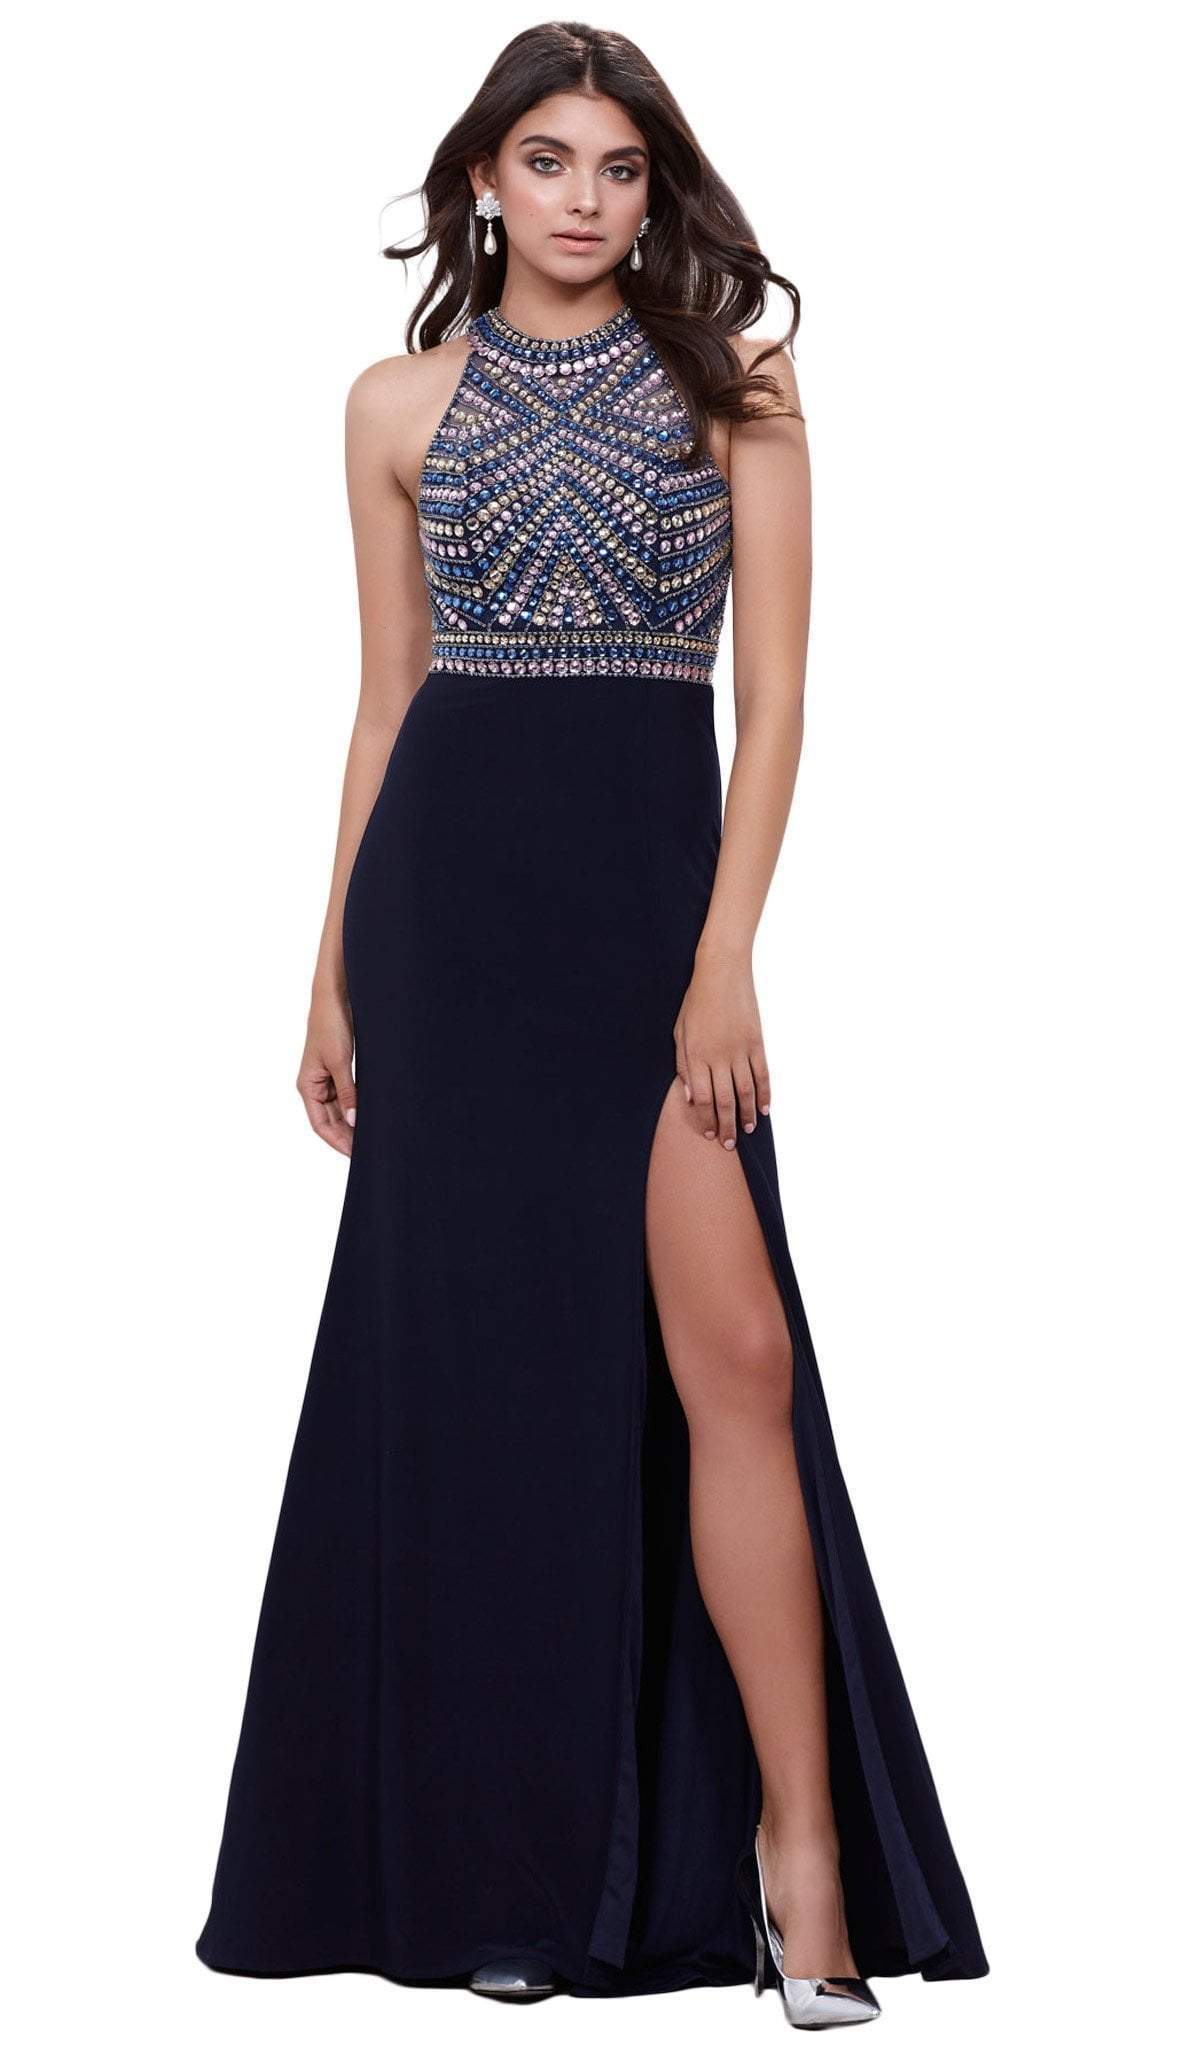 Nox Anabel - 8321 Rhinestone Embellished Halter Illusion Evening Gown Special Occasion Dress XS / Navy